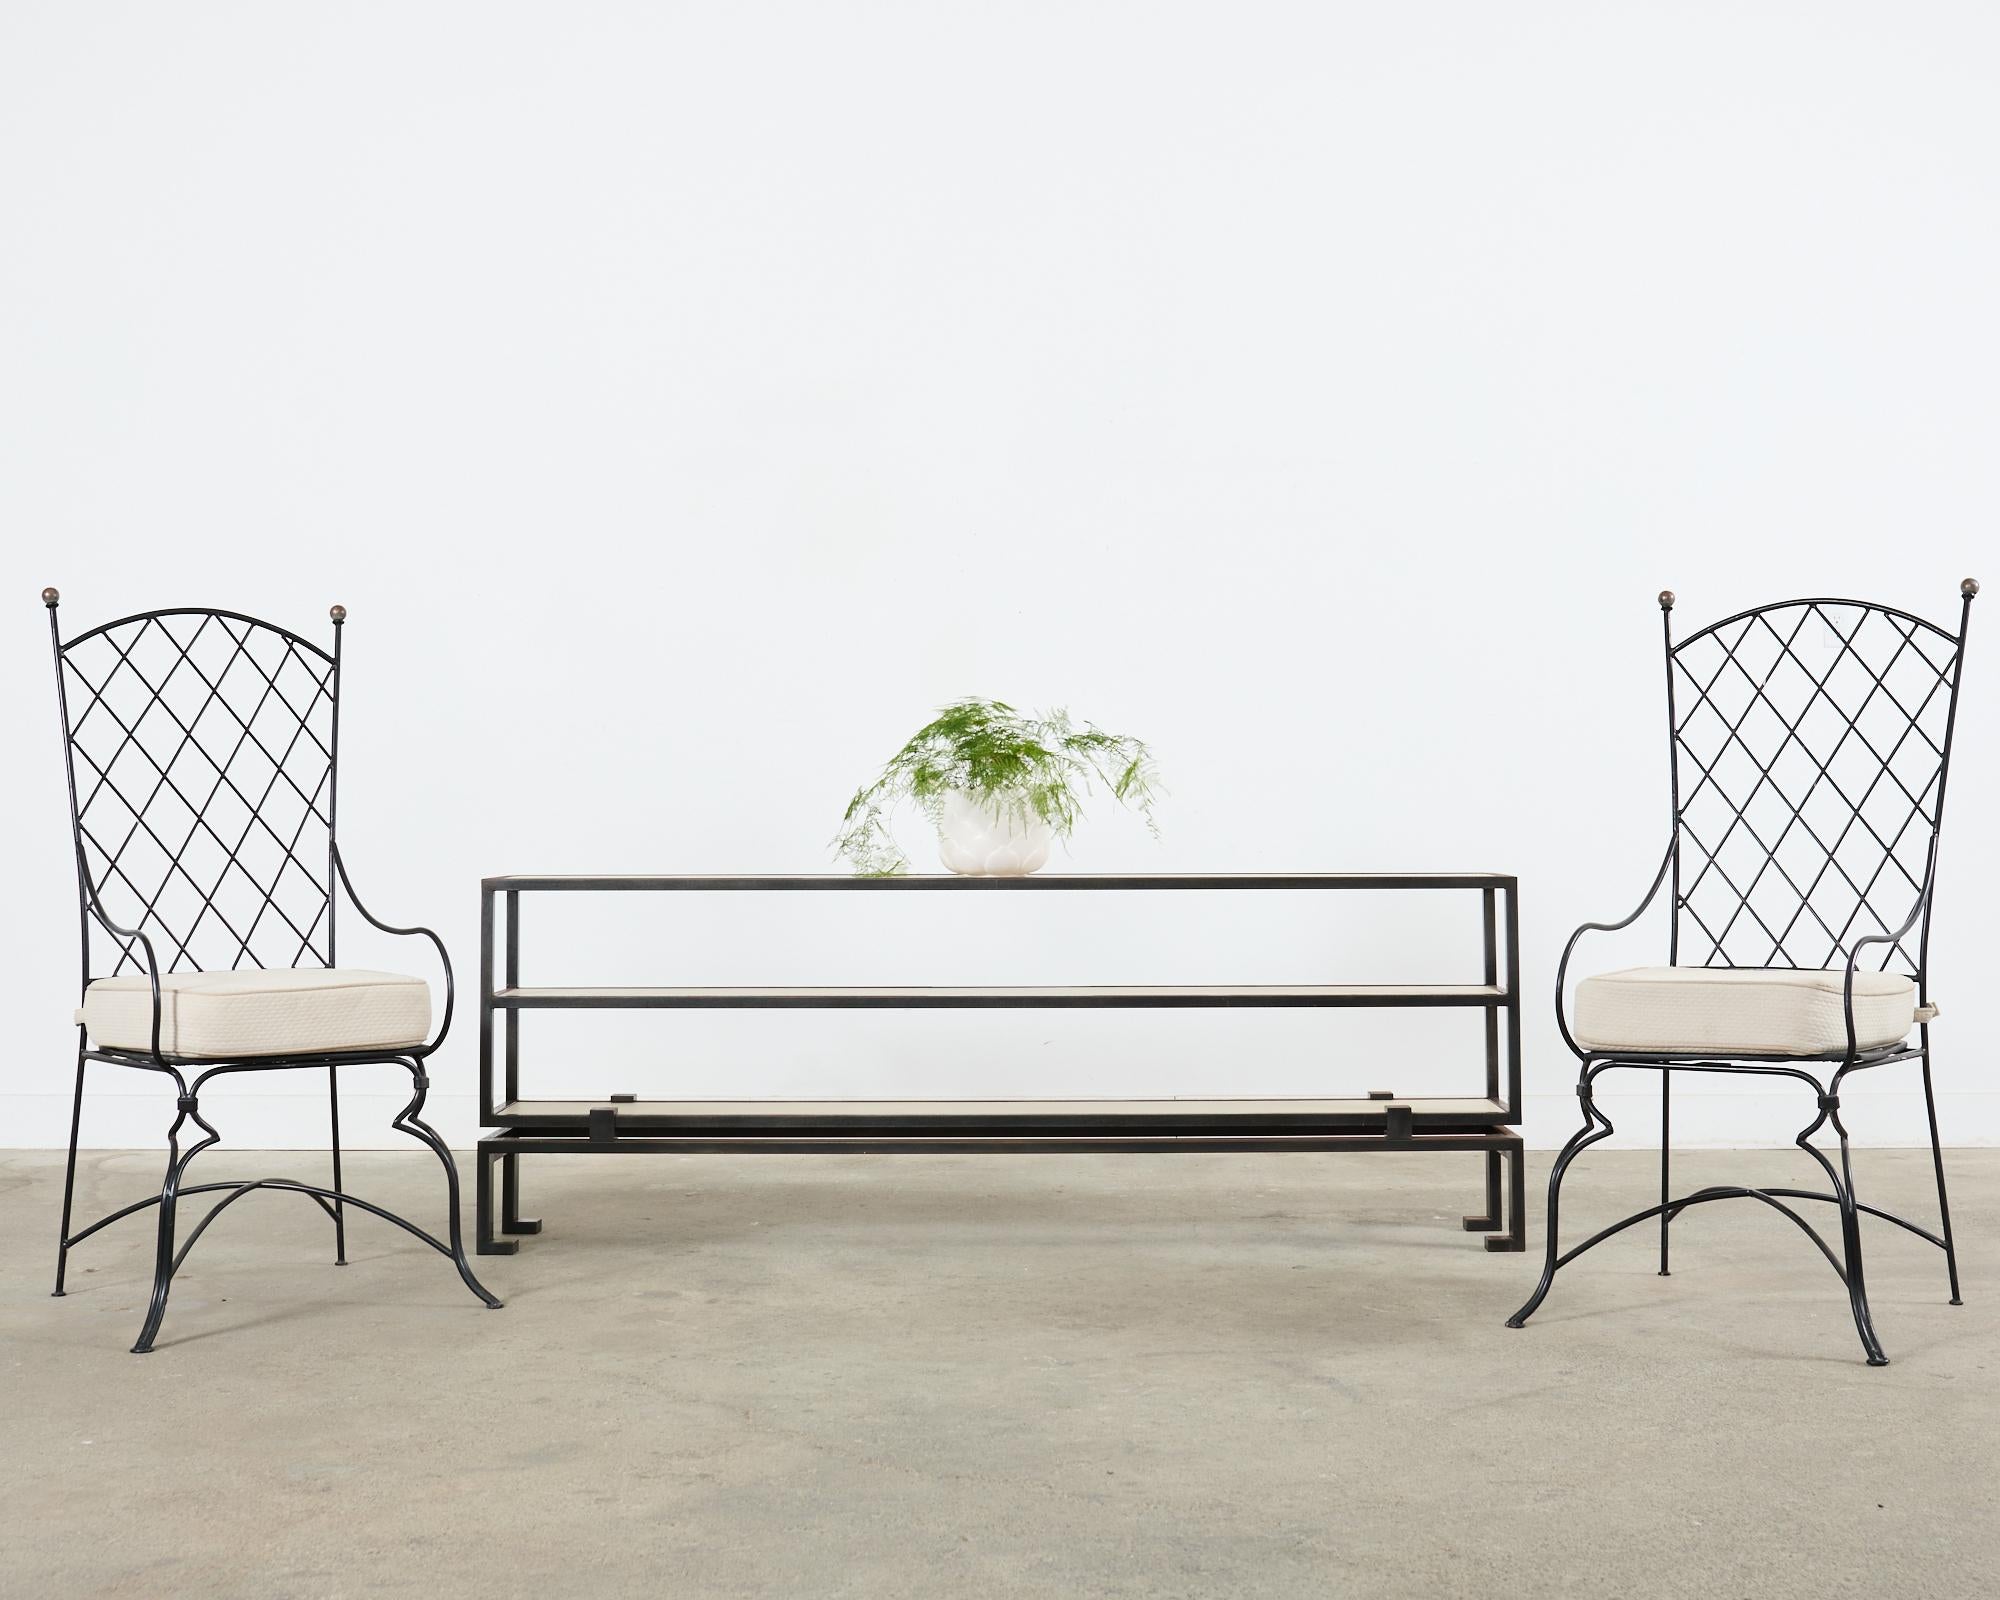 Large bespoke industrial style three tier console table featuring faux parchment leather shelves. The long console measures 7 feet long constructed from a thick iron frame with a patinated finish. The three shelf top is supported by a base with